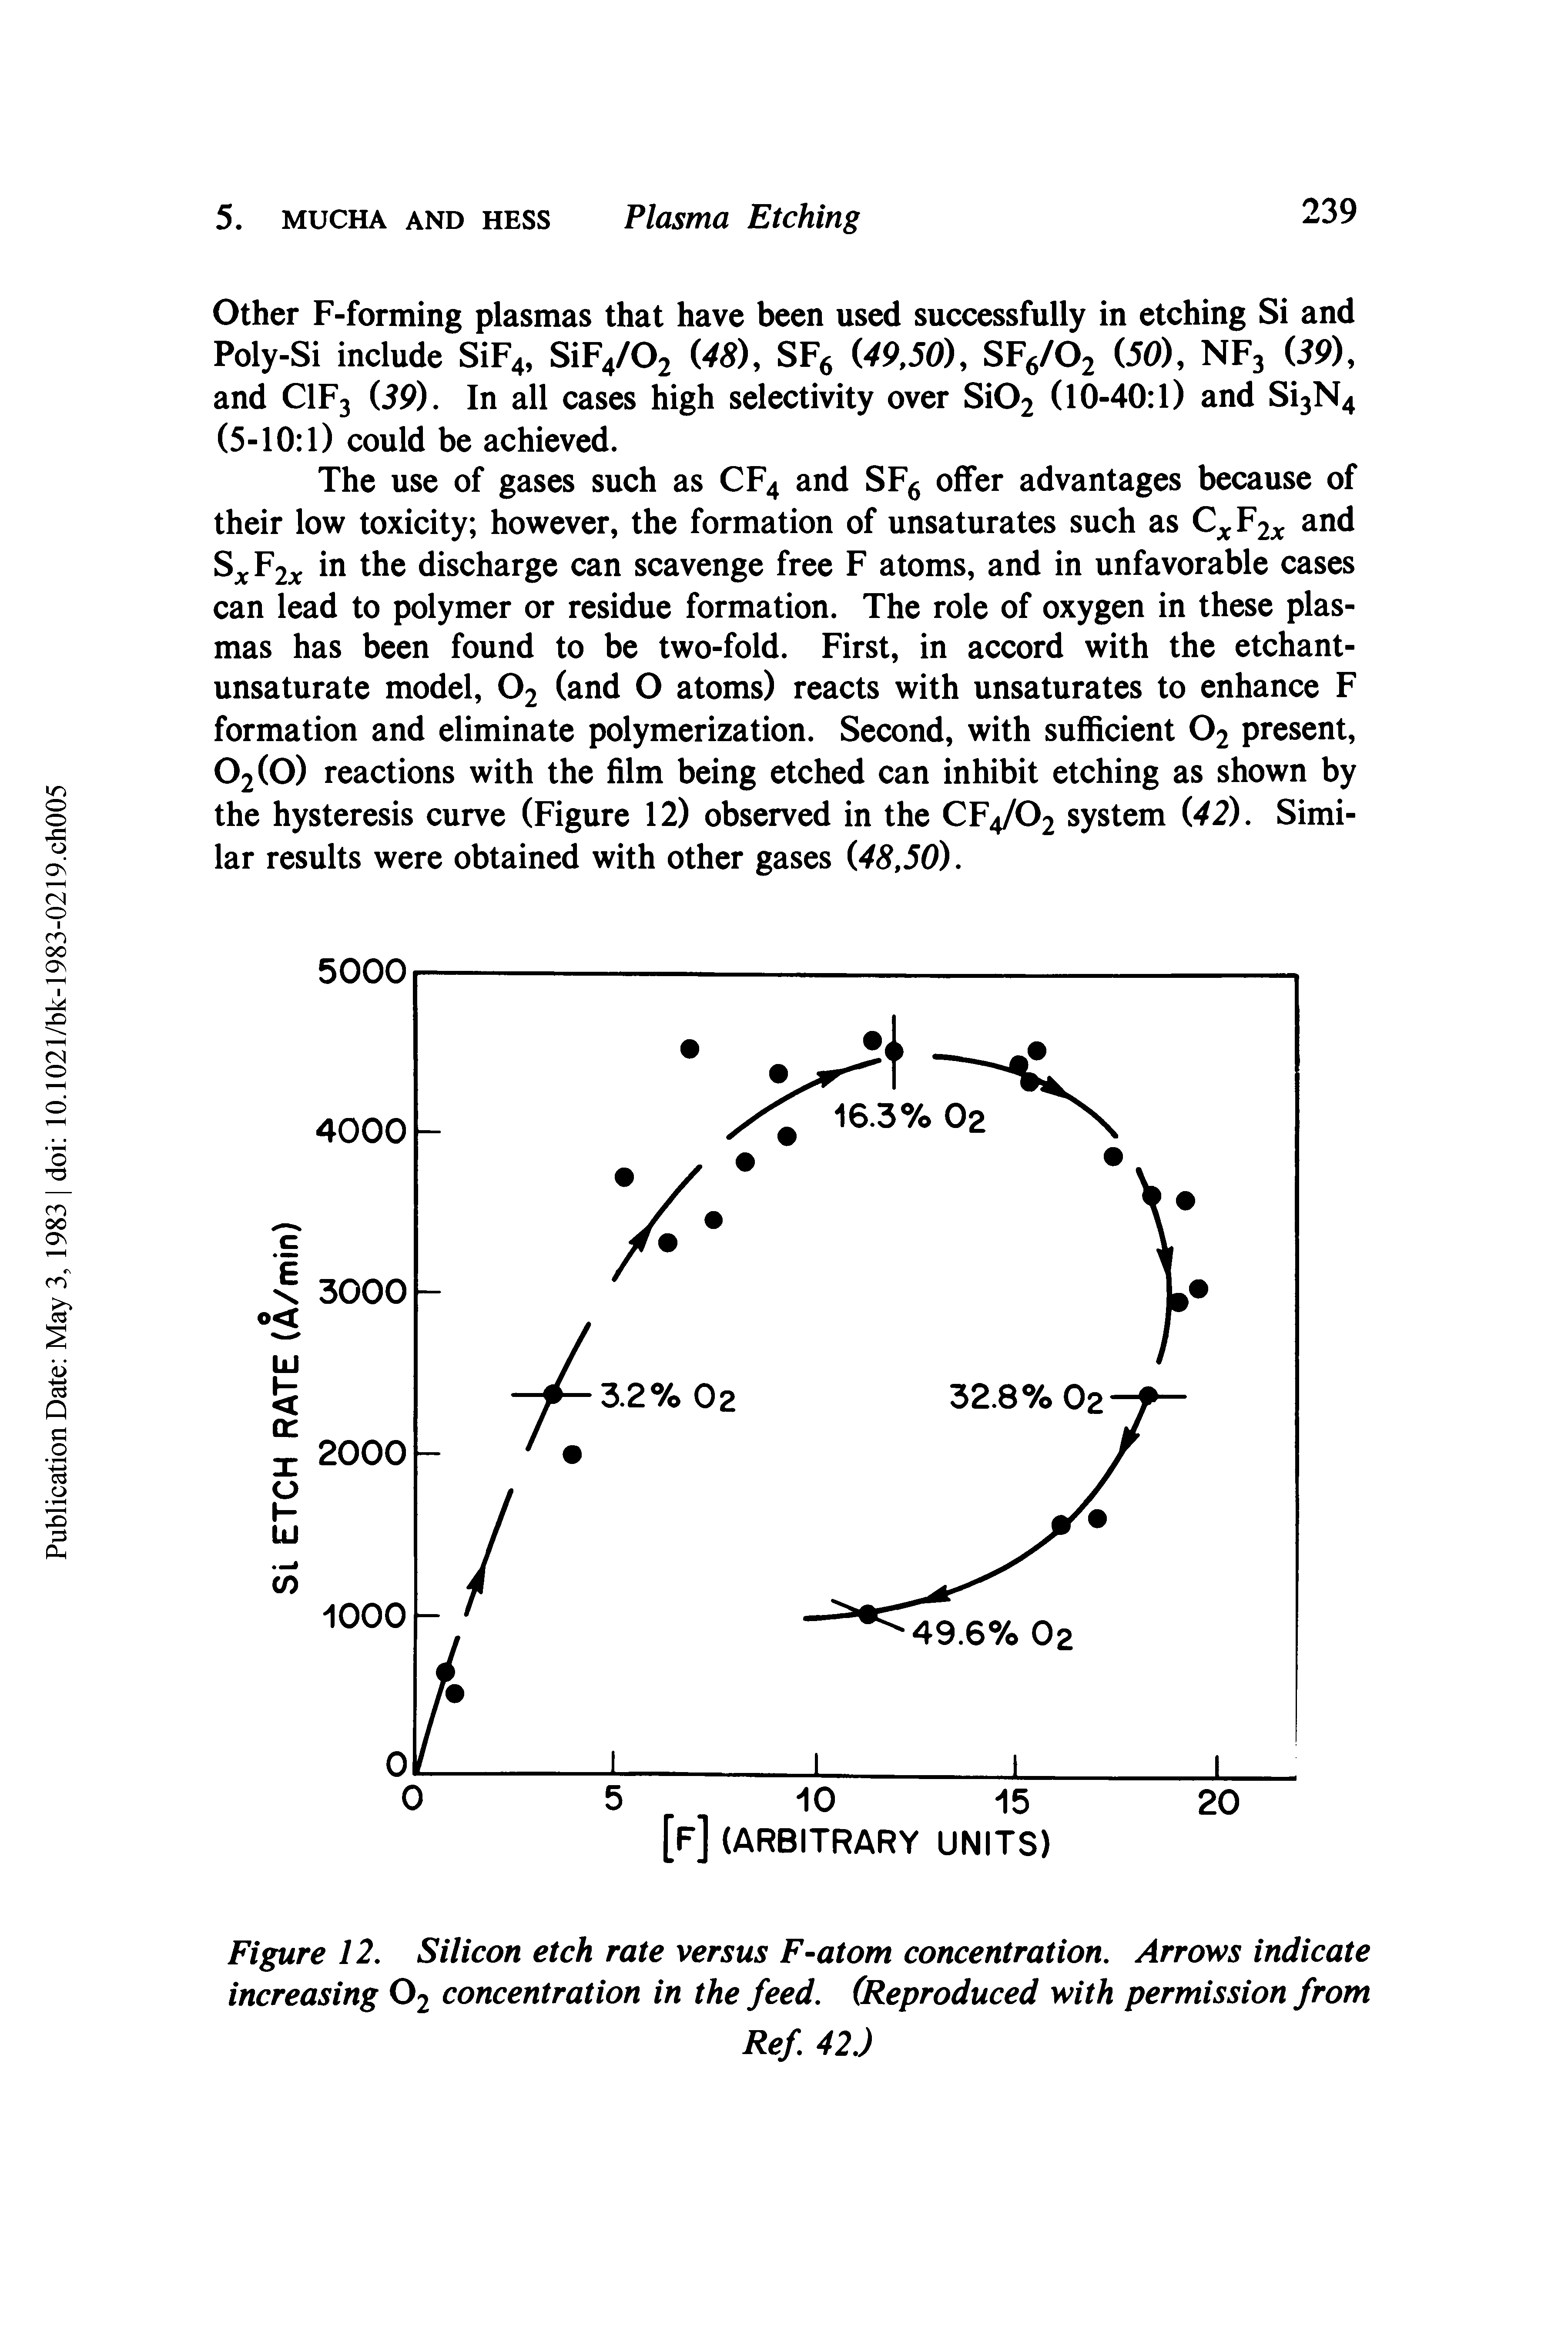 Figure 12. Silicon etch rate versus F-atom concentration. Arrows indicate increasing O2 concentration in the feed. (Reproduced with permission from...